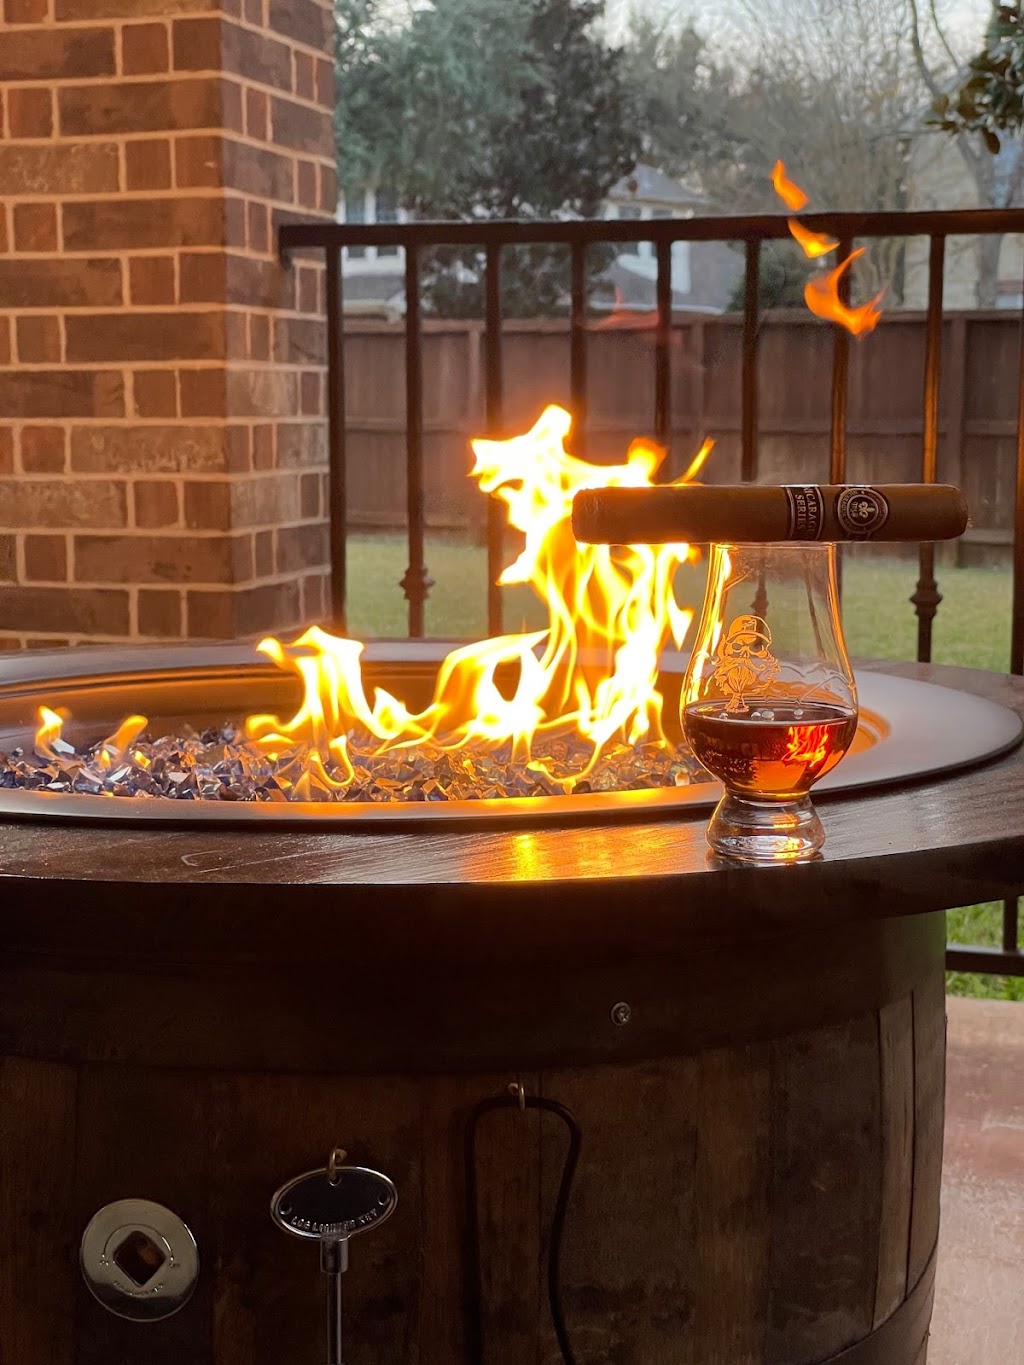 80Proof Fire Products | 21114 Park Brook Dr, Katy, TX 77450 | Phone: (832) 464-8169